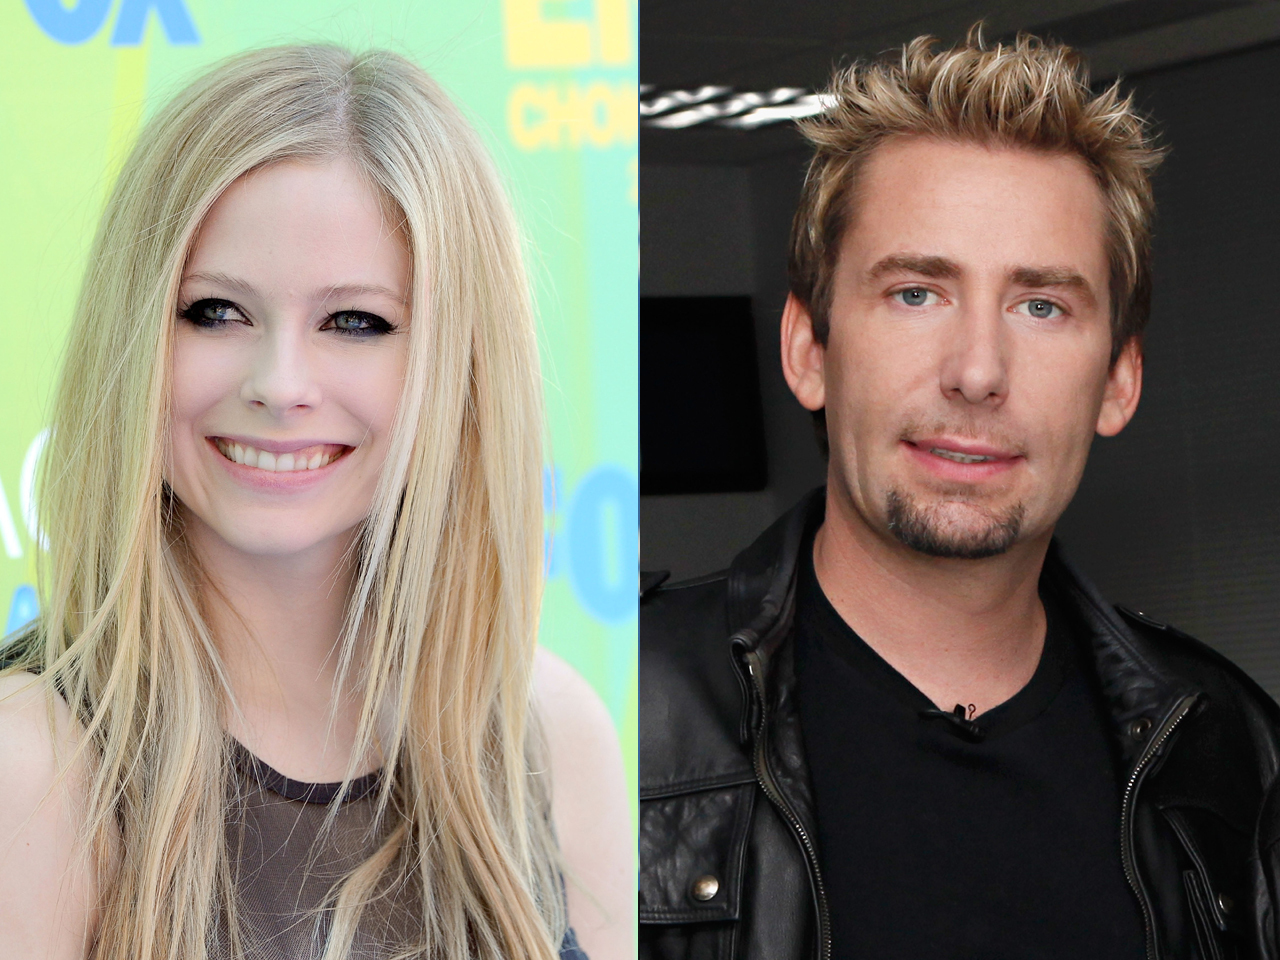 Avril Lavigne and Nickelback frontman Chad Kroeger to tie the knot